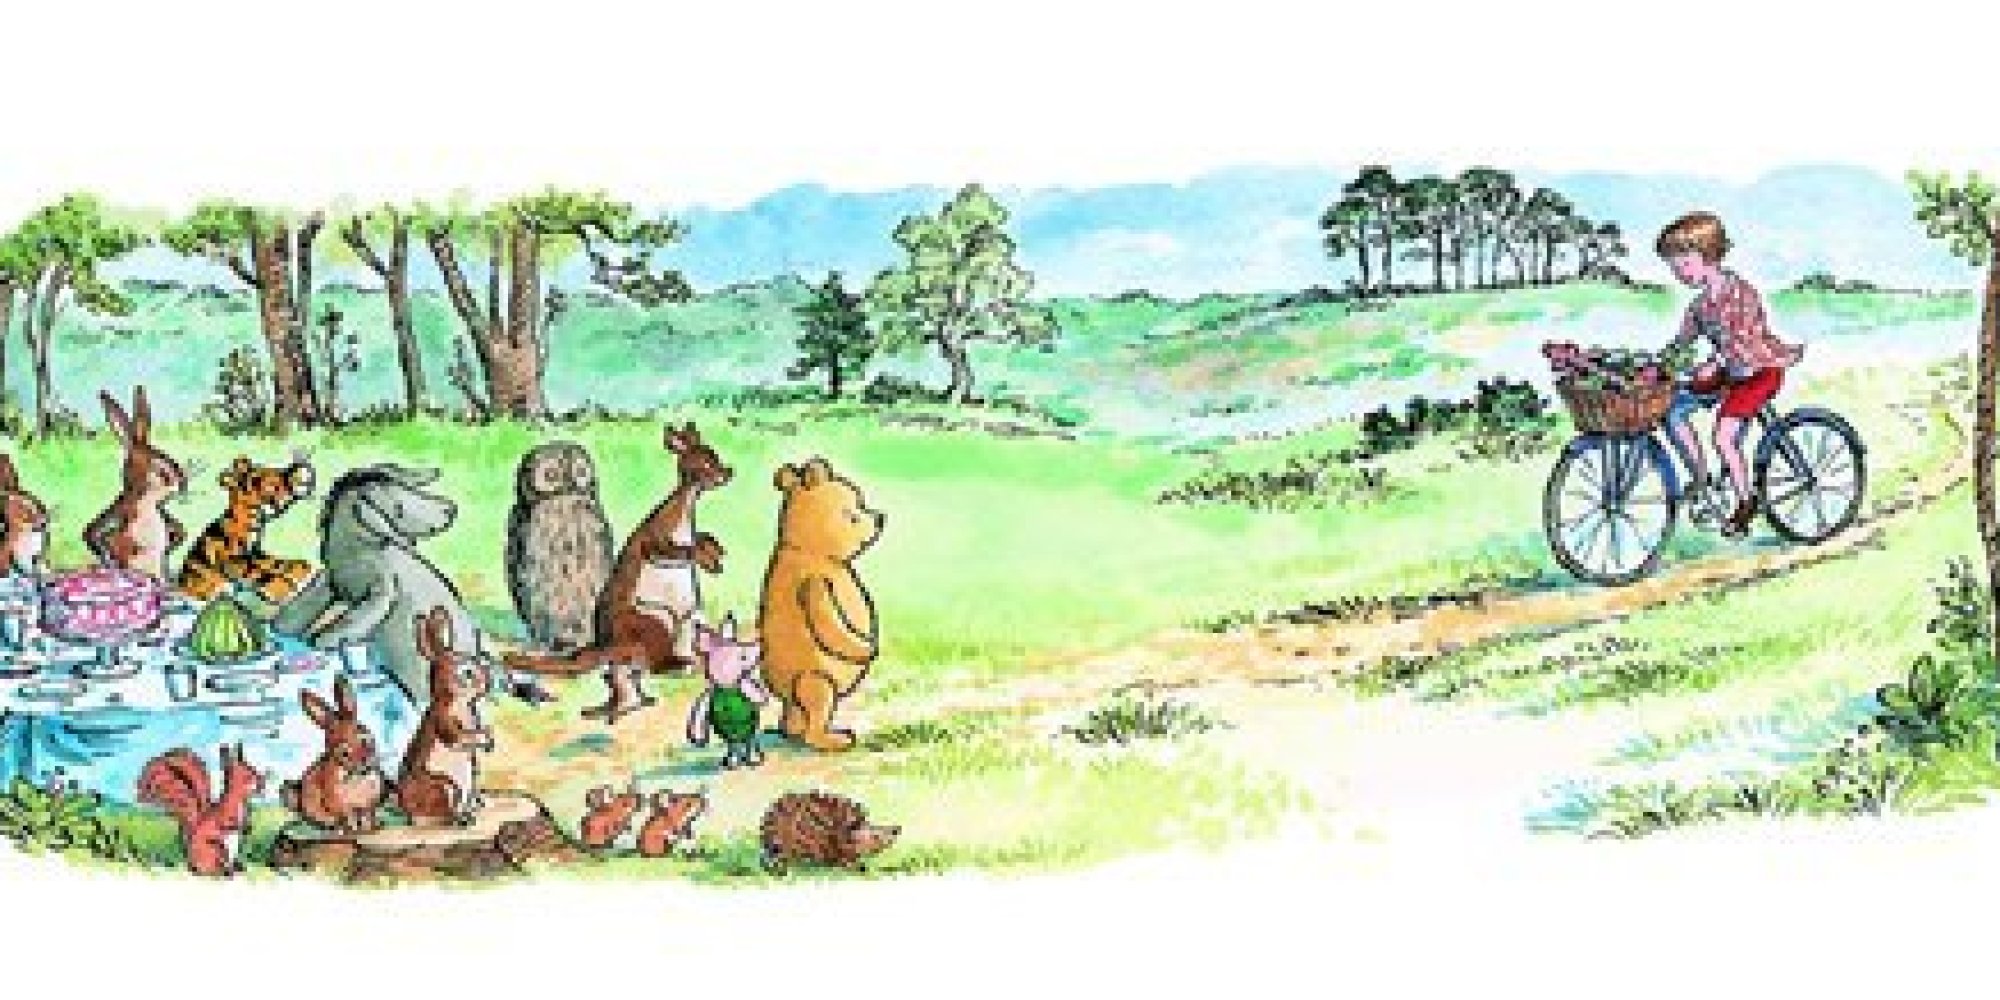 8 Heartbreakingly Adorable Quotes From Winnie-The-Pooh | HuffPost